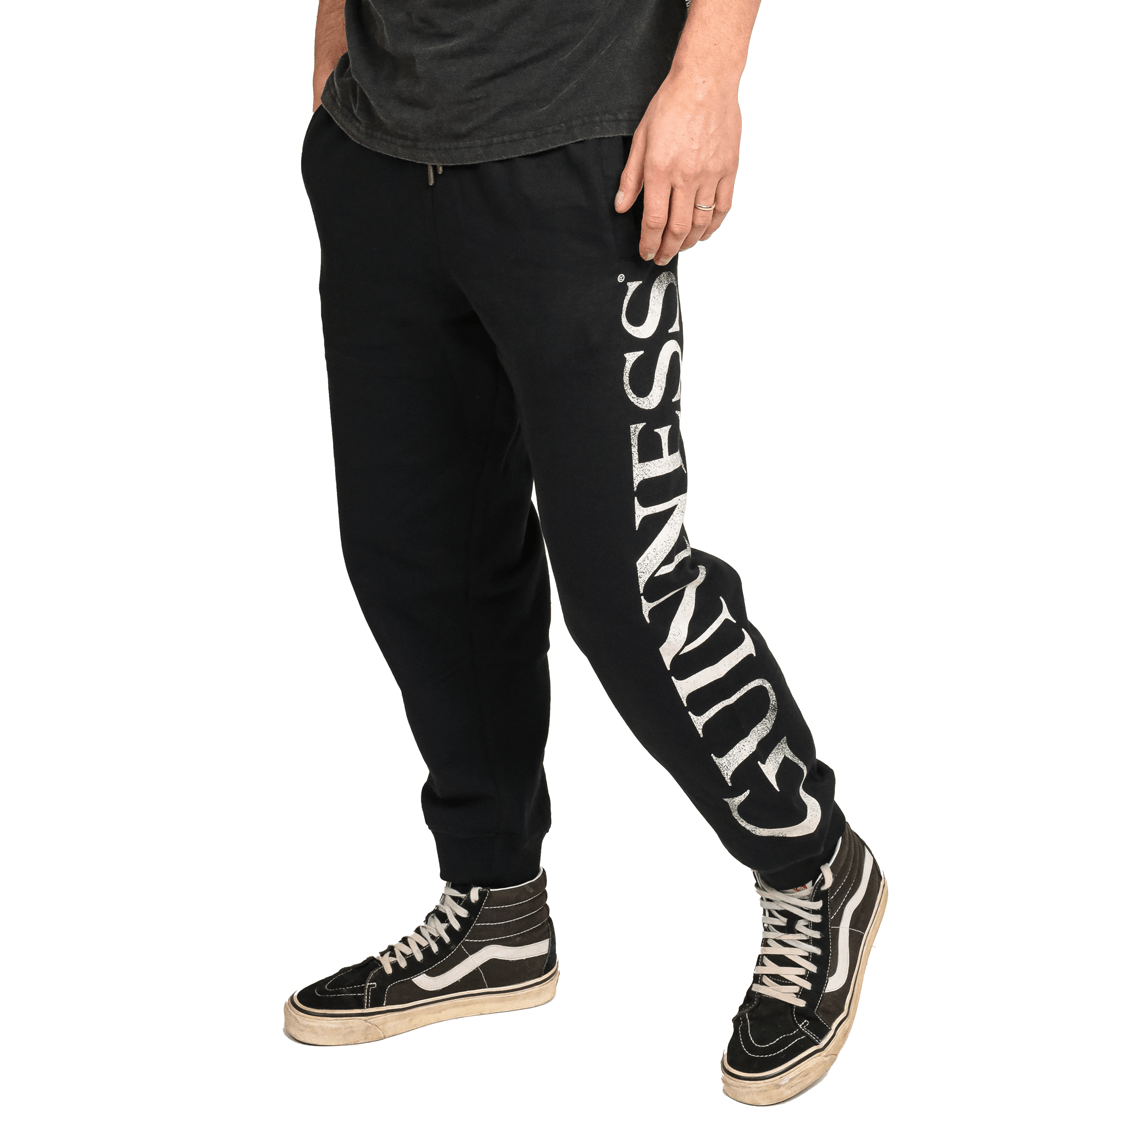 Guinness Joggers - black. Made with organic cotton, these Guinness joggers are both comfortable and stylish. Perfect for lounging or running errands, these joggers are a must-have in any